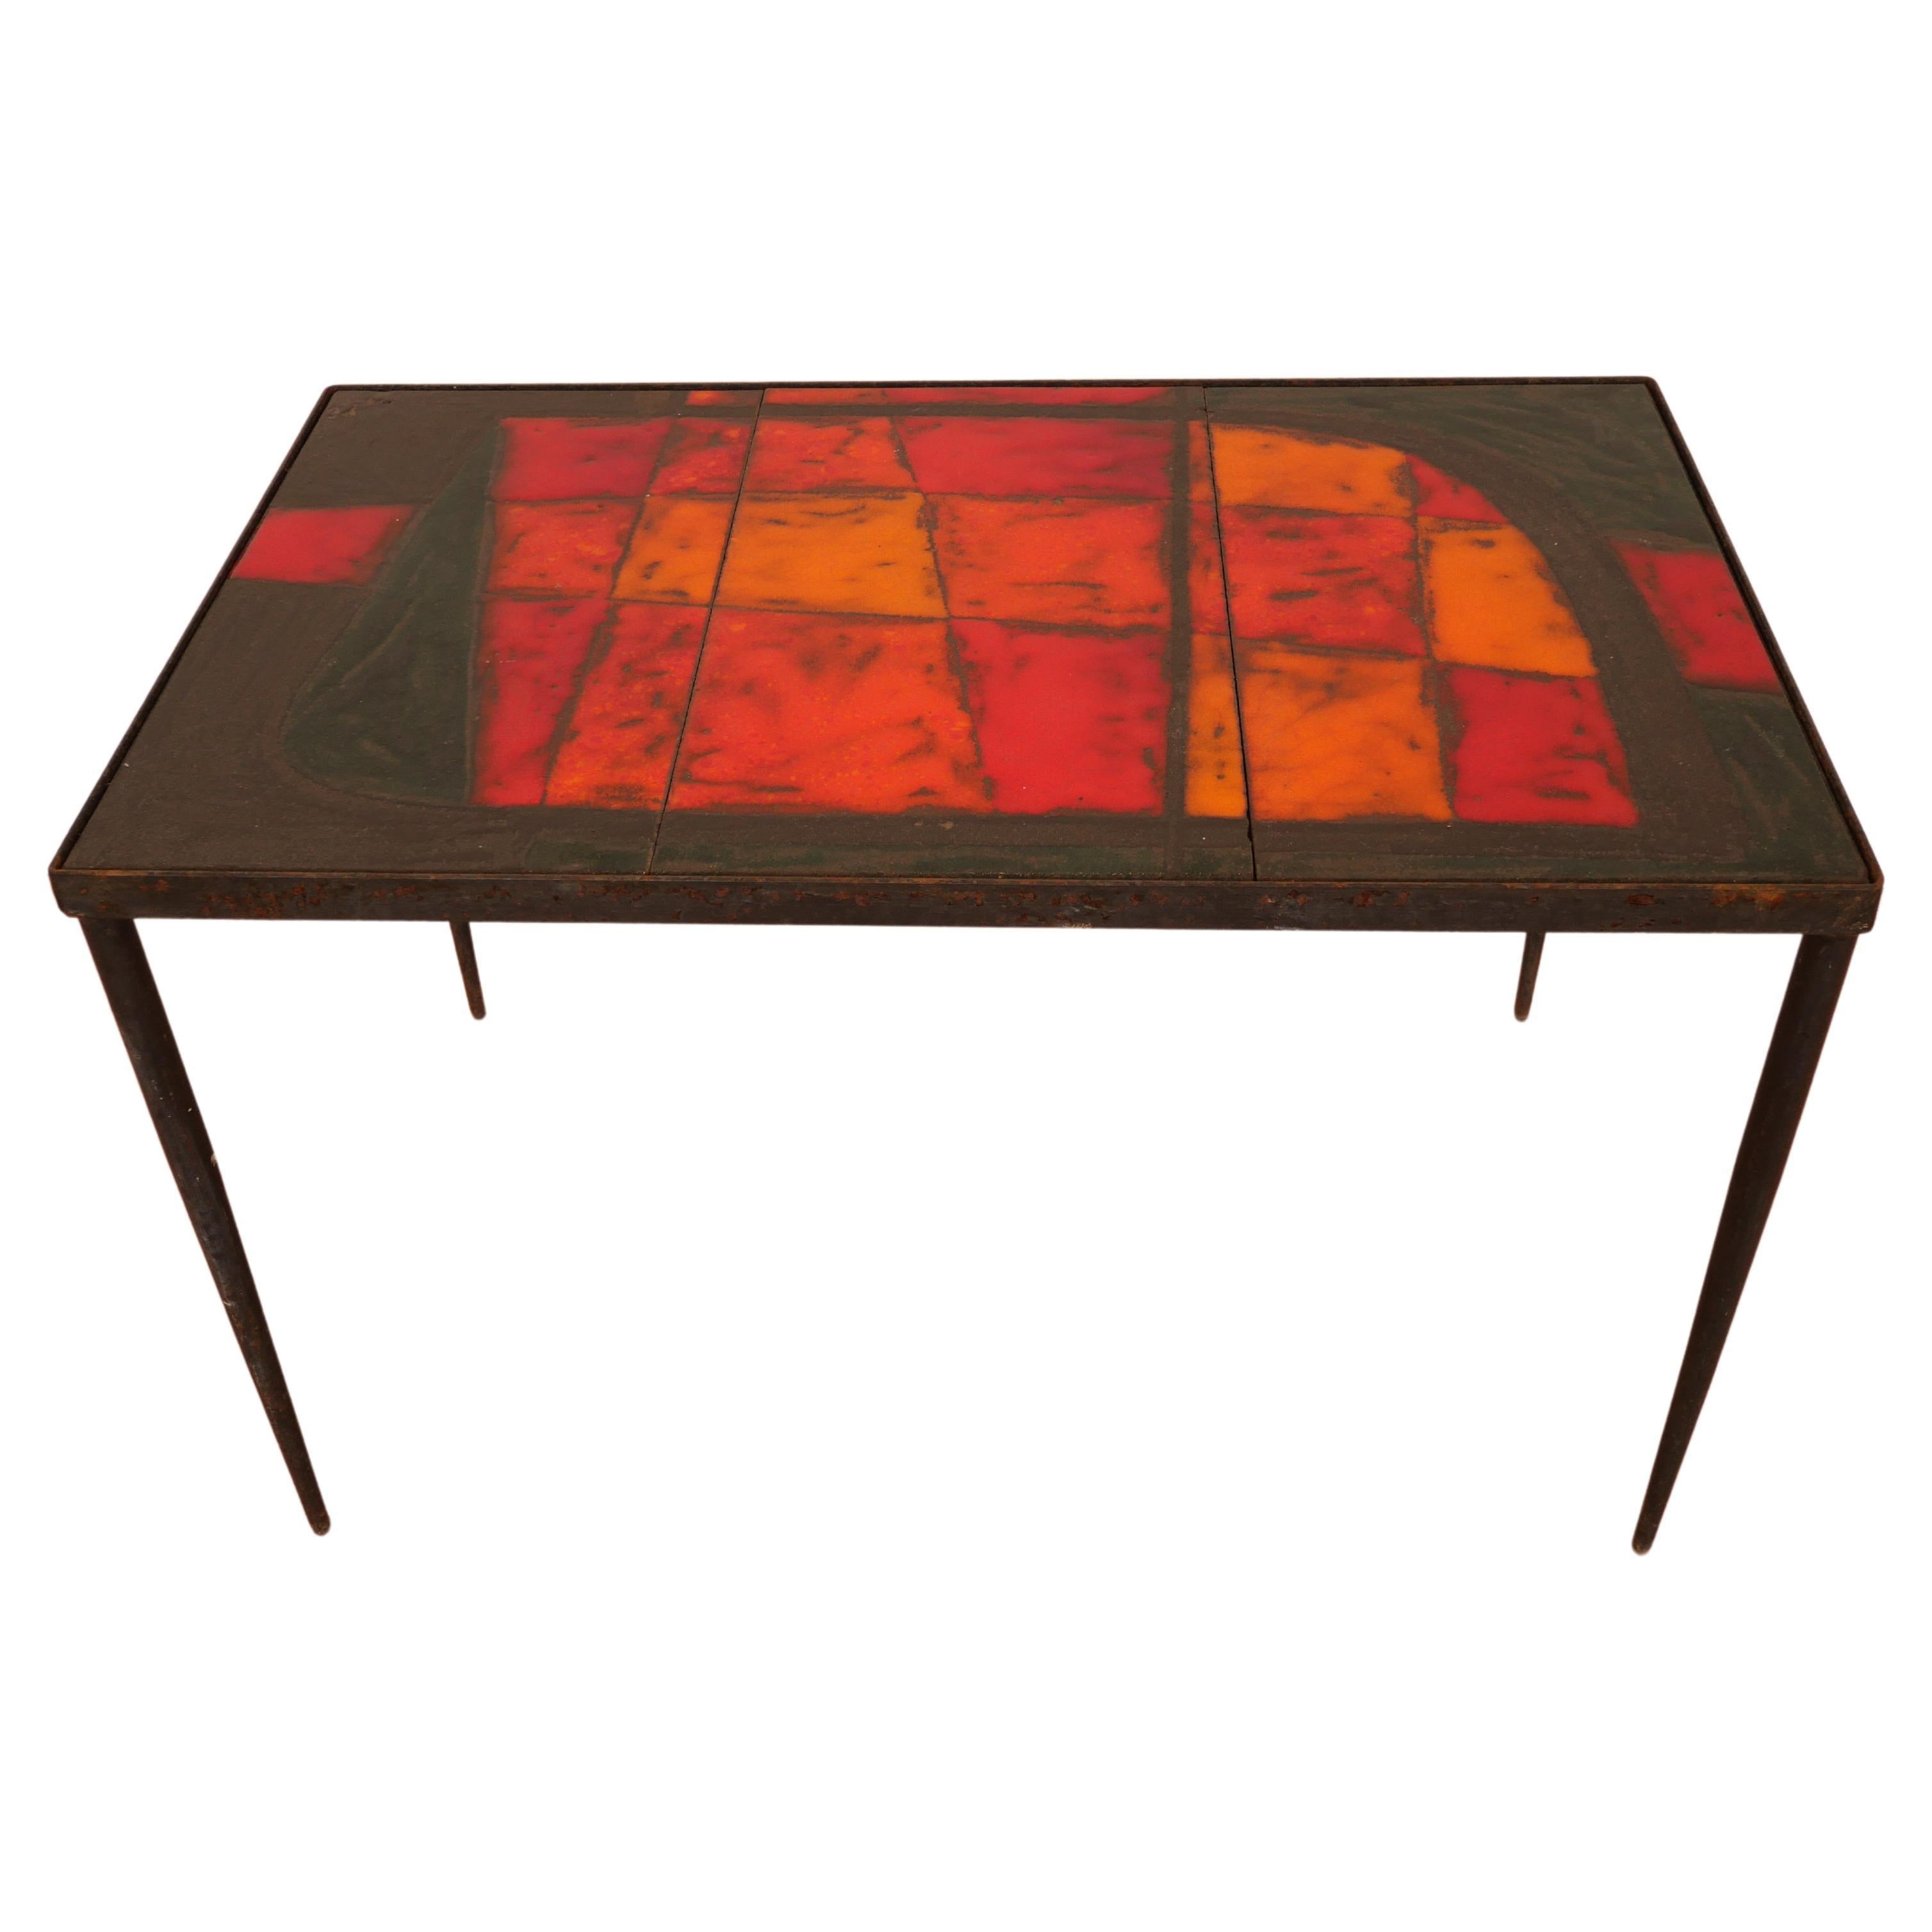 Cloutier Brothers Red enameled Lava Tile Coffee Table